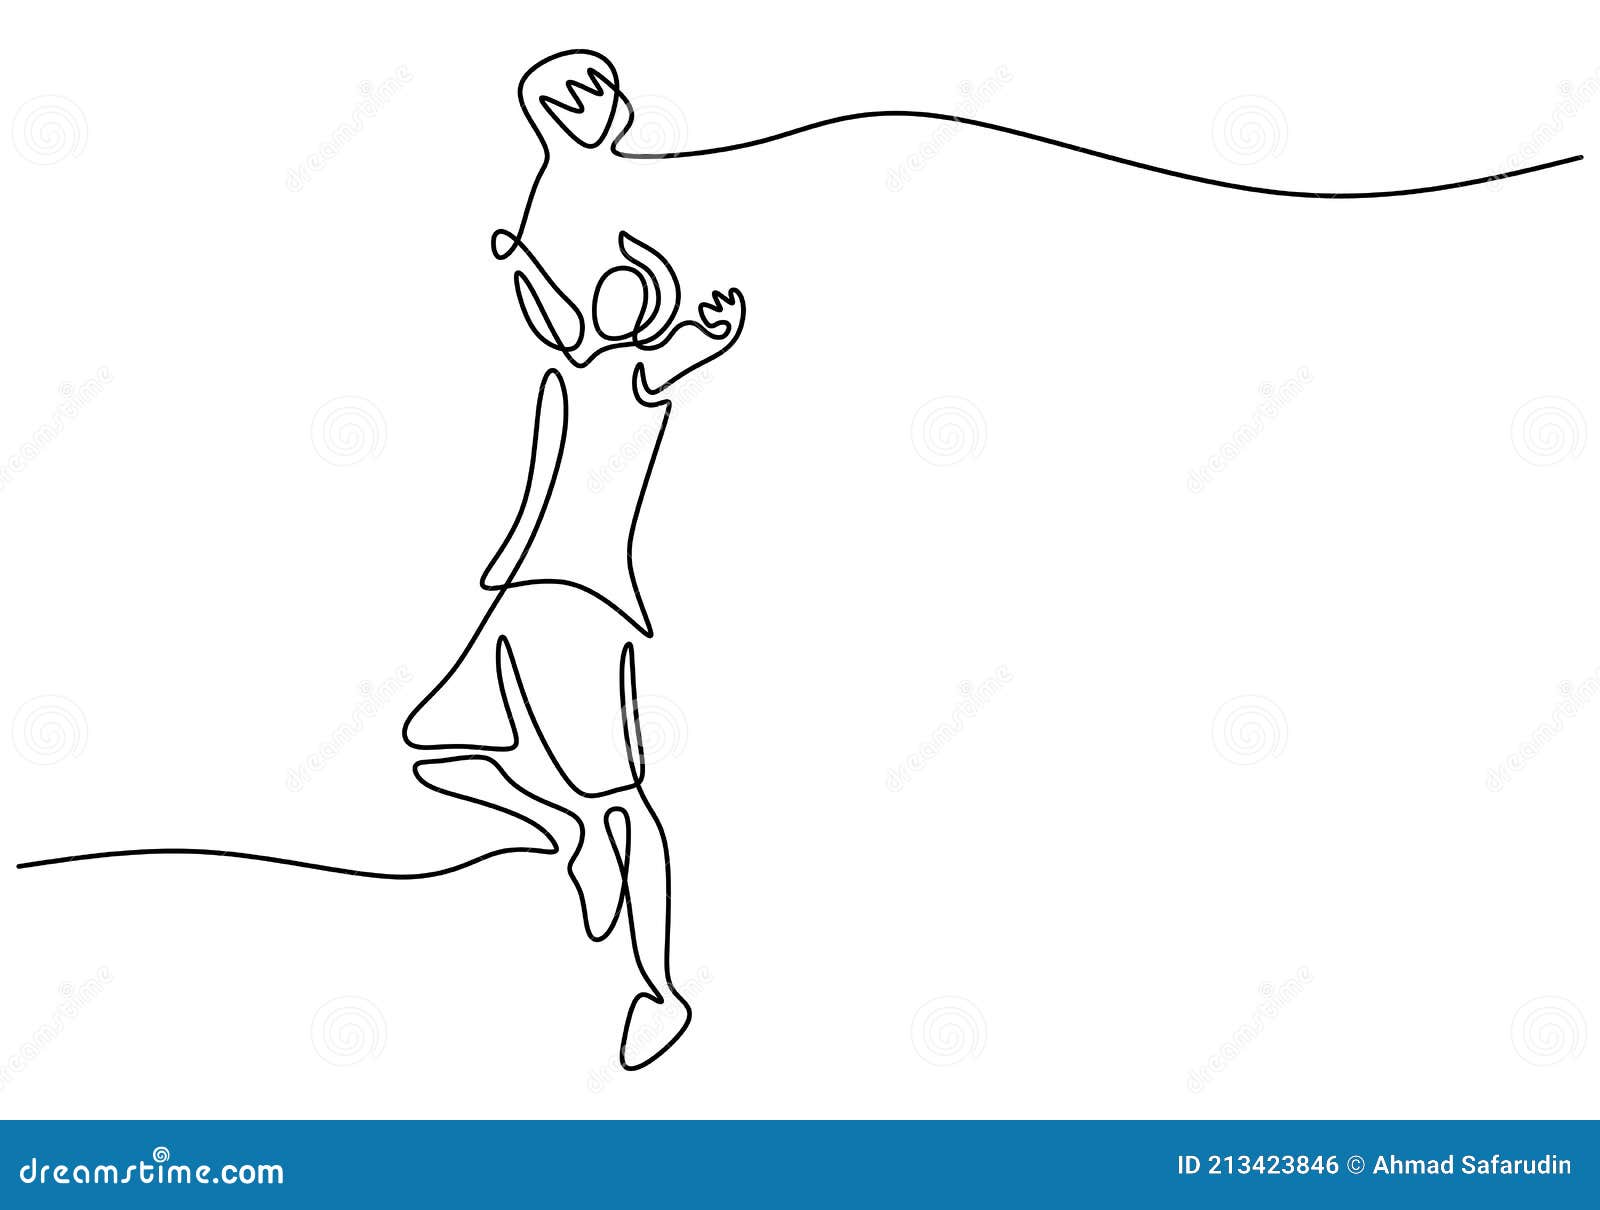 Continuous One Line Drawing of Young Man Athlete Playing Badminton. a ...